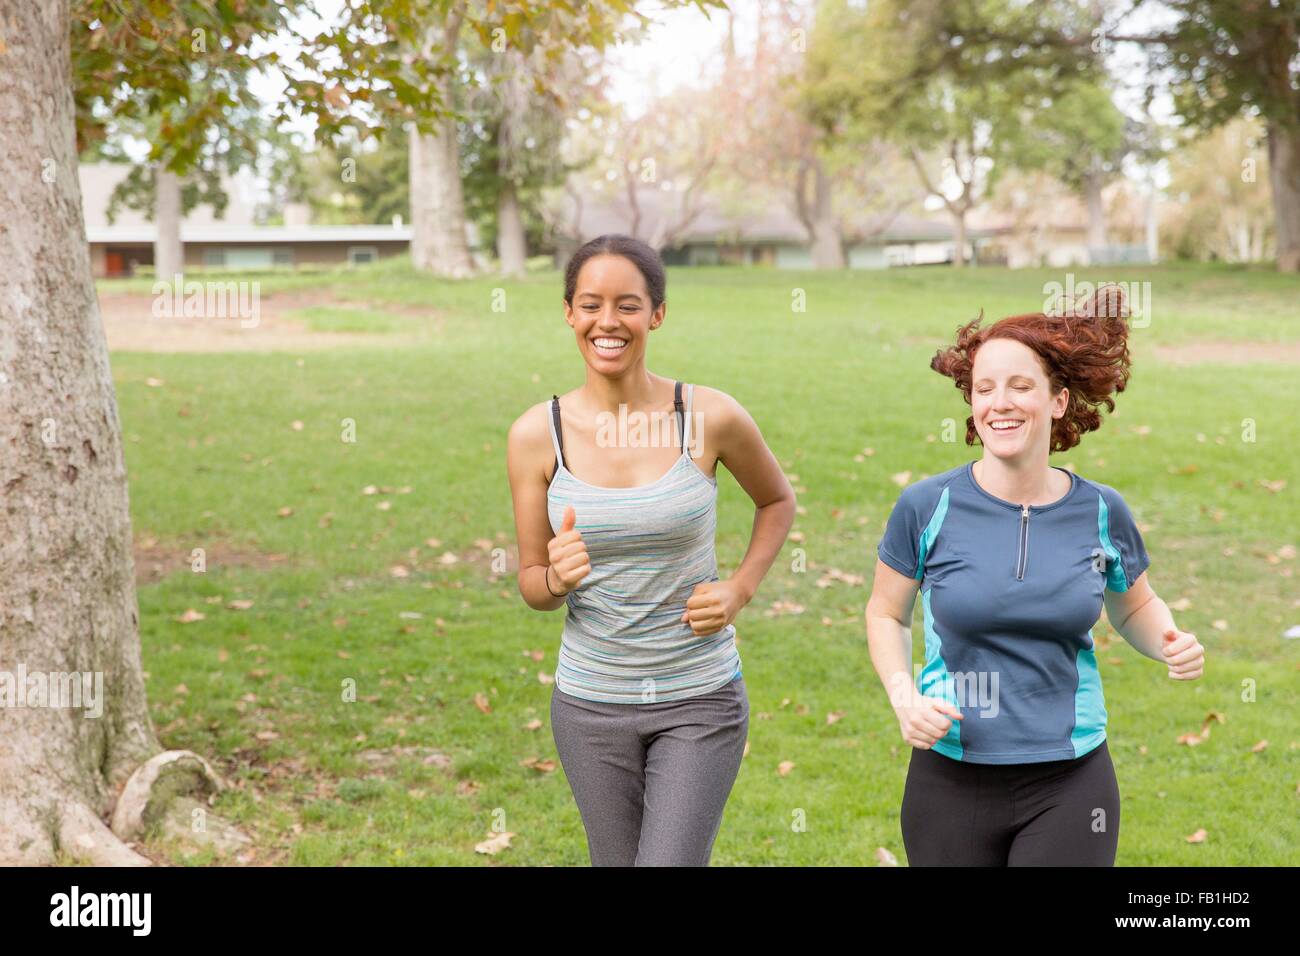 Full length front view of women wearing sport clothing running on grass smiling Stock Photo